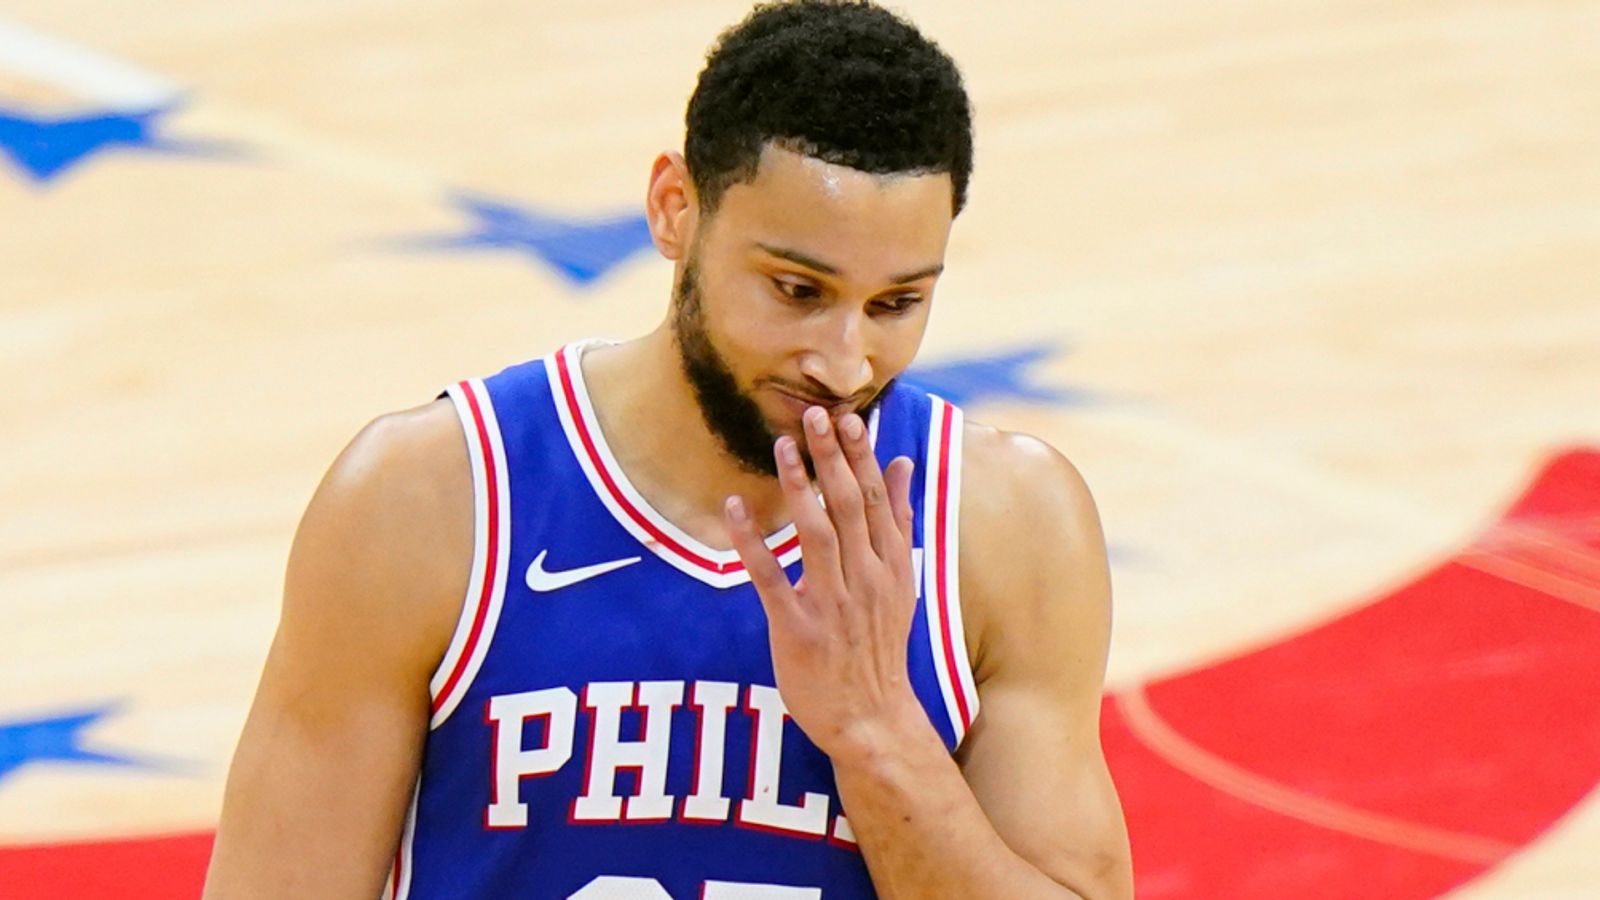 Basketball News: ‘I’ve got his back,’ Patty Mills says of Ben Simmons after the Brooklyn Nets trade unites the close-knit Australian duo